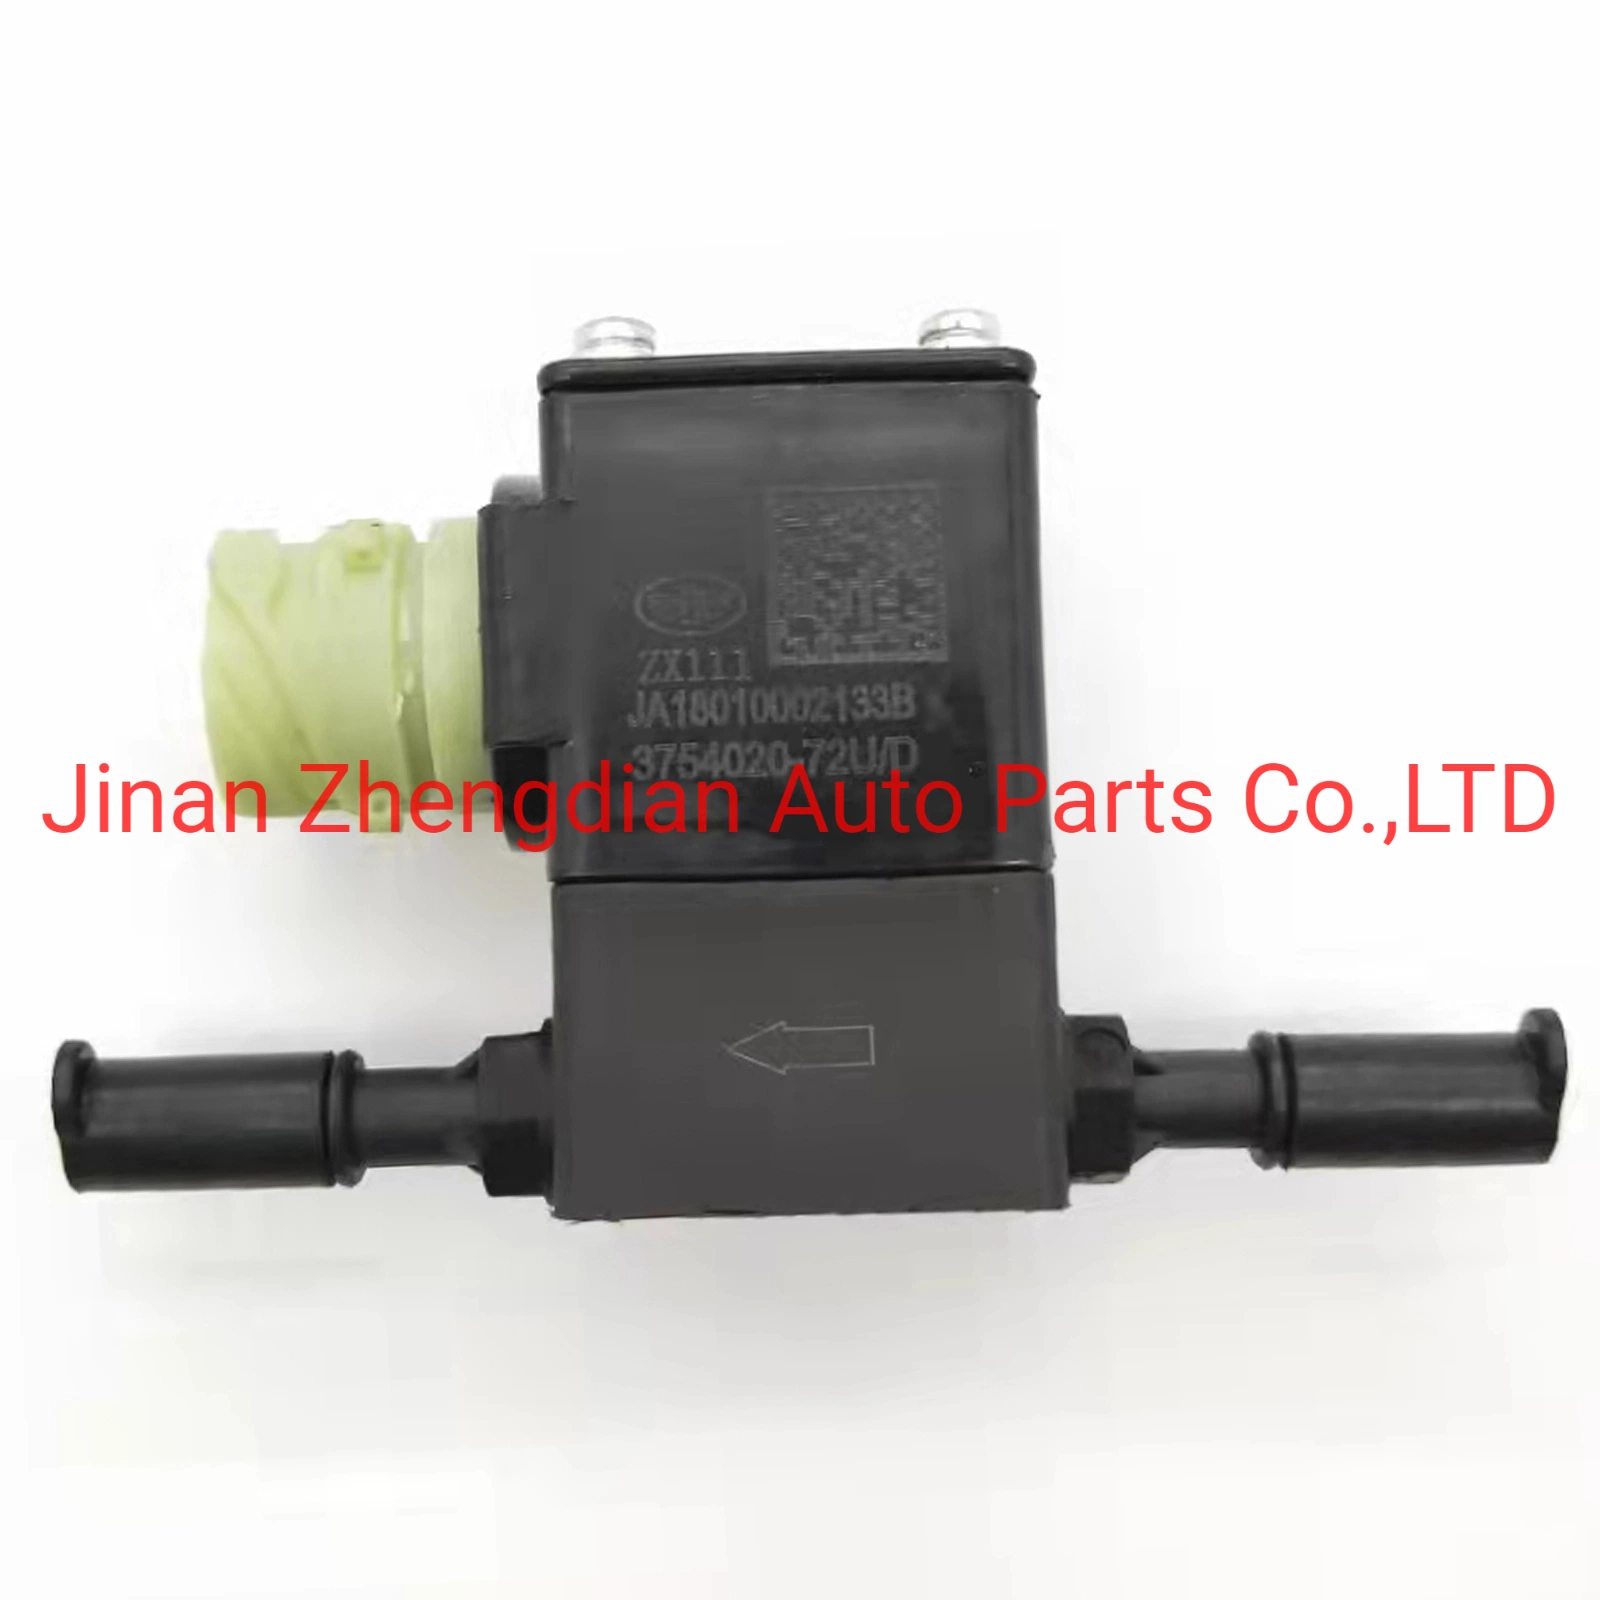 12js160t-170302 Single H Valve Fast Gearbox Valve for Beiben North Benz Sinotruk HOWO Steyr Sitrak Shacman FAW Foton Auman FAW Camc Hongyan Truck Spare Parts